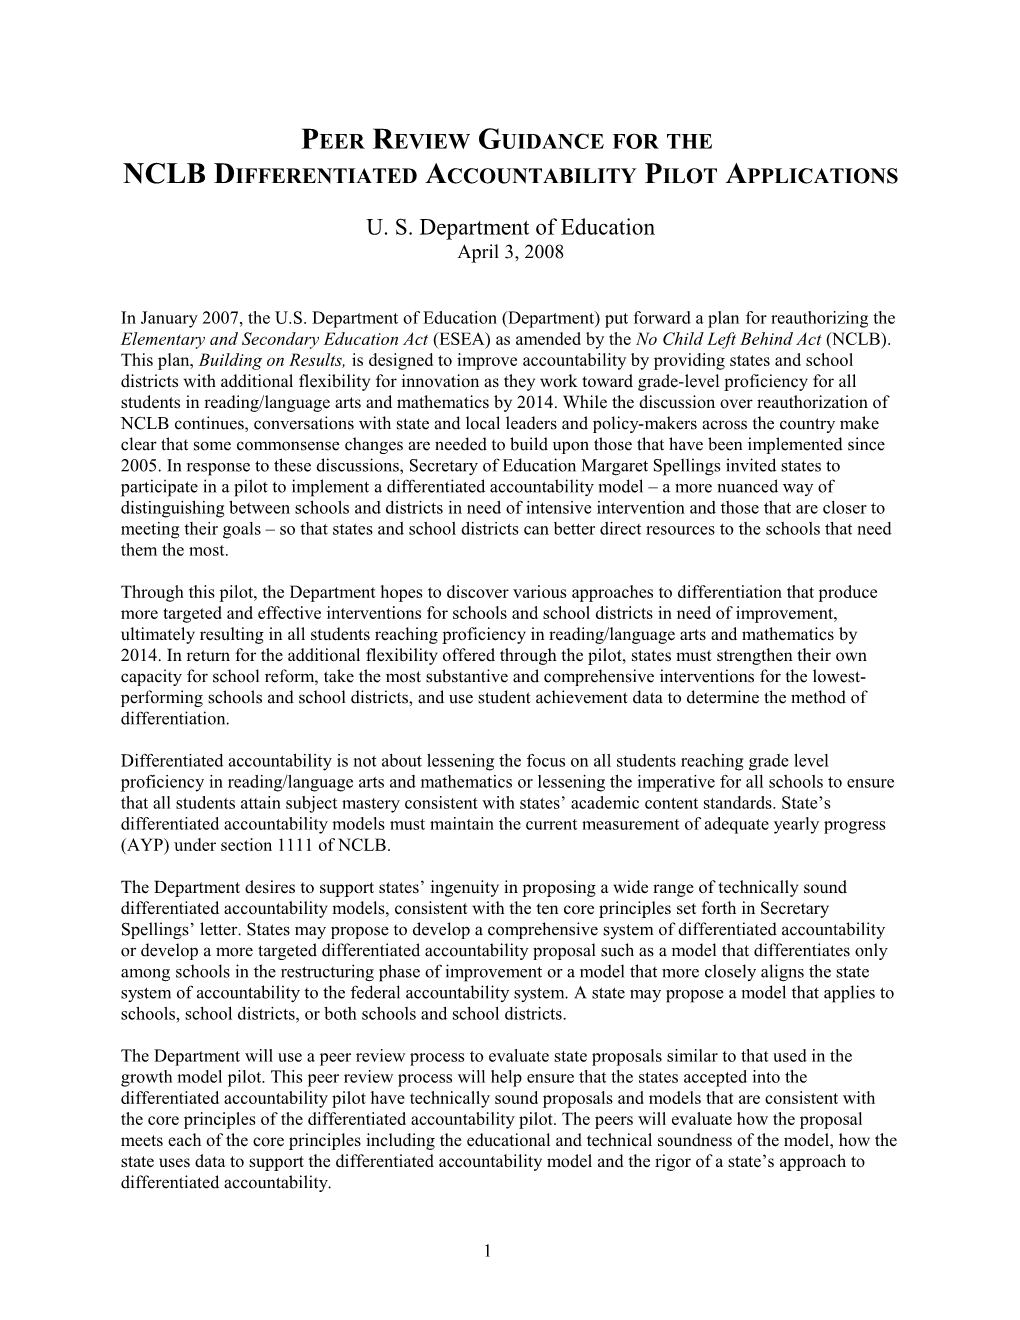 Peer Review Guidance for the NCLB Differentiated Accountability Pilot Applications (MS Word)